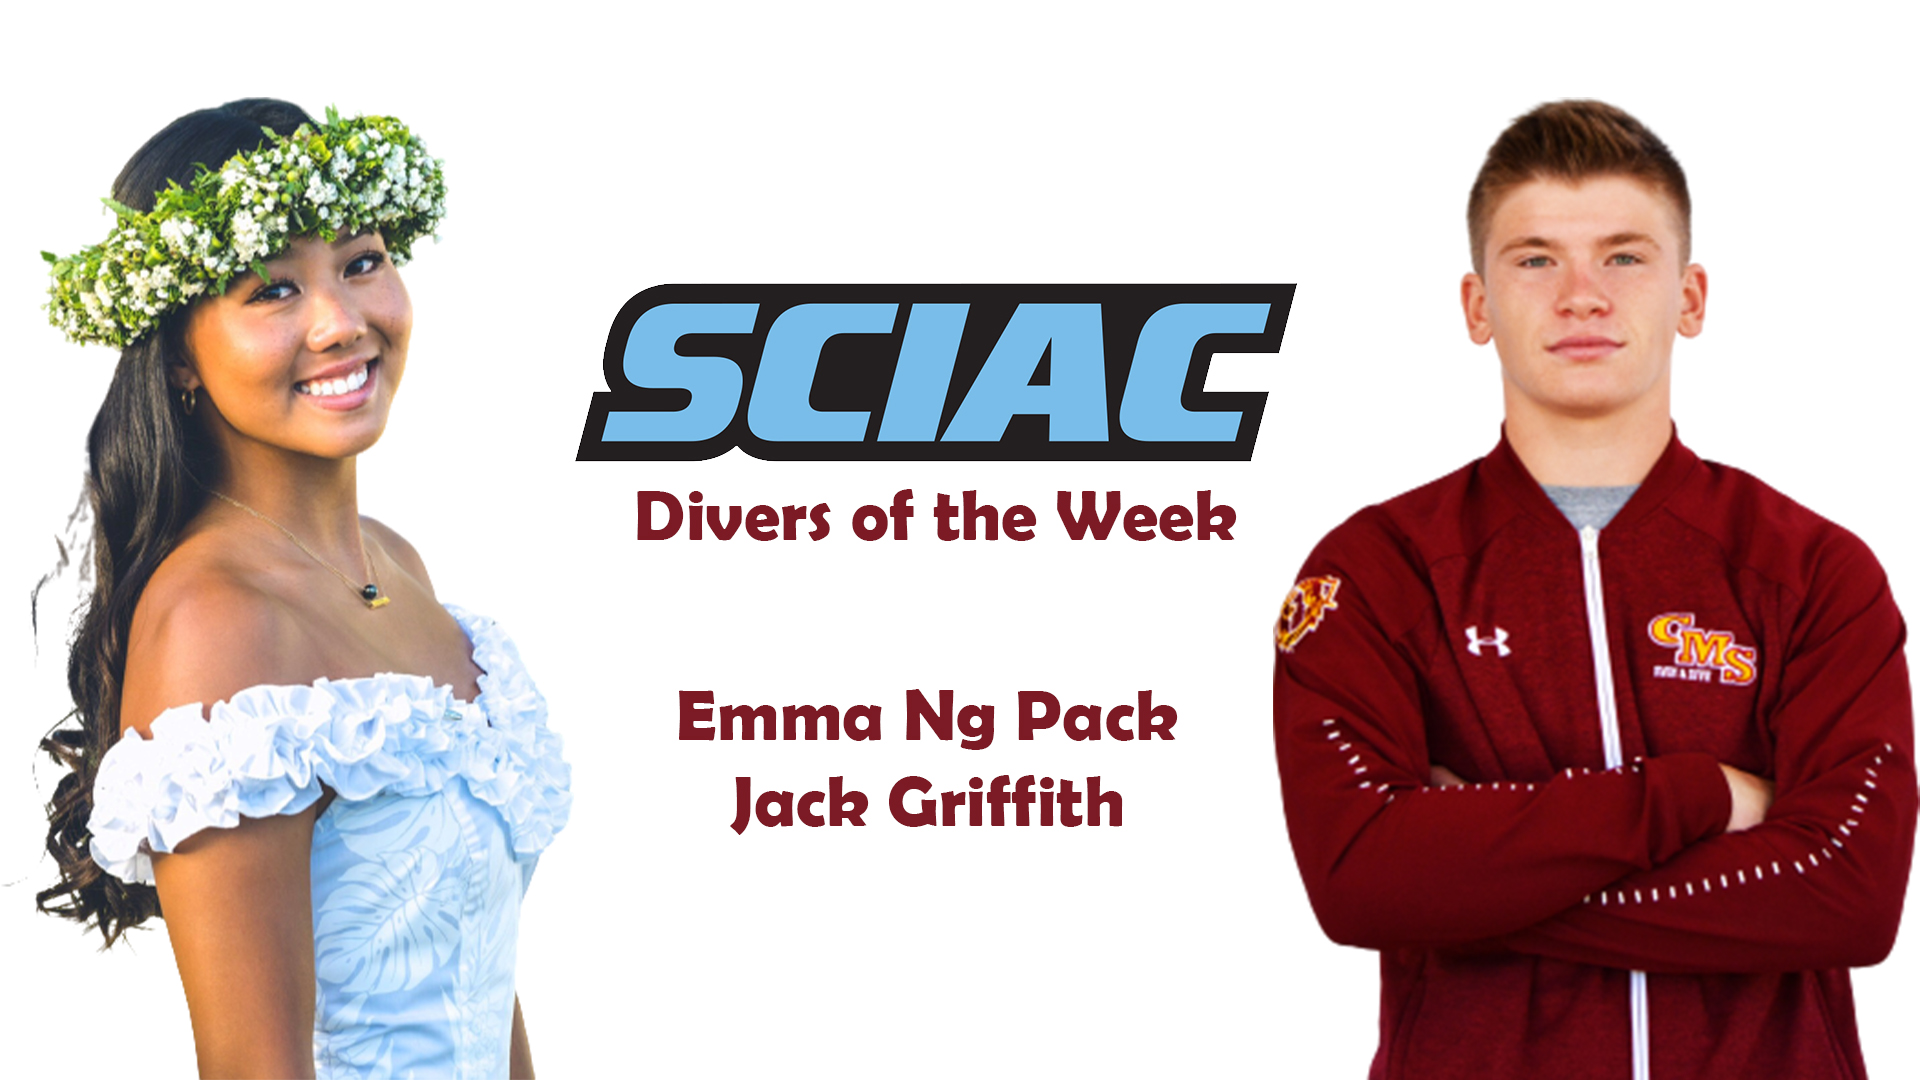 head shots of Emma Ng Pack and Jack Griffith, with the SCIAC logo and the words Divers of the Week.